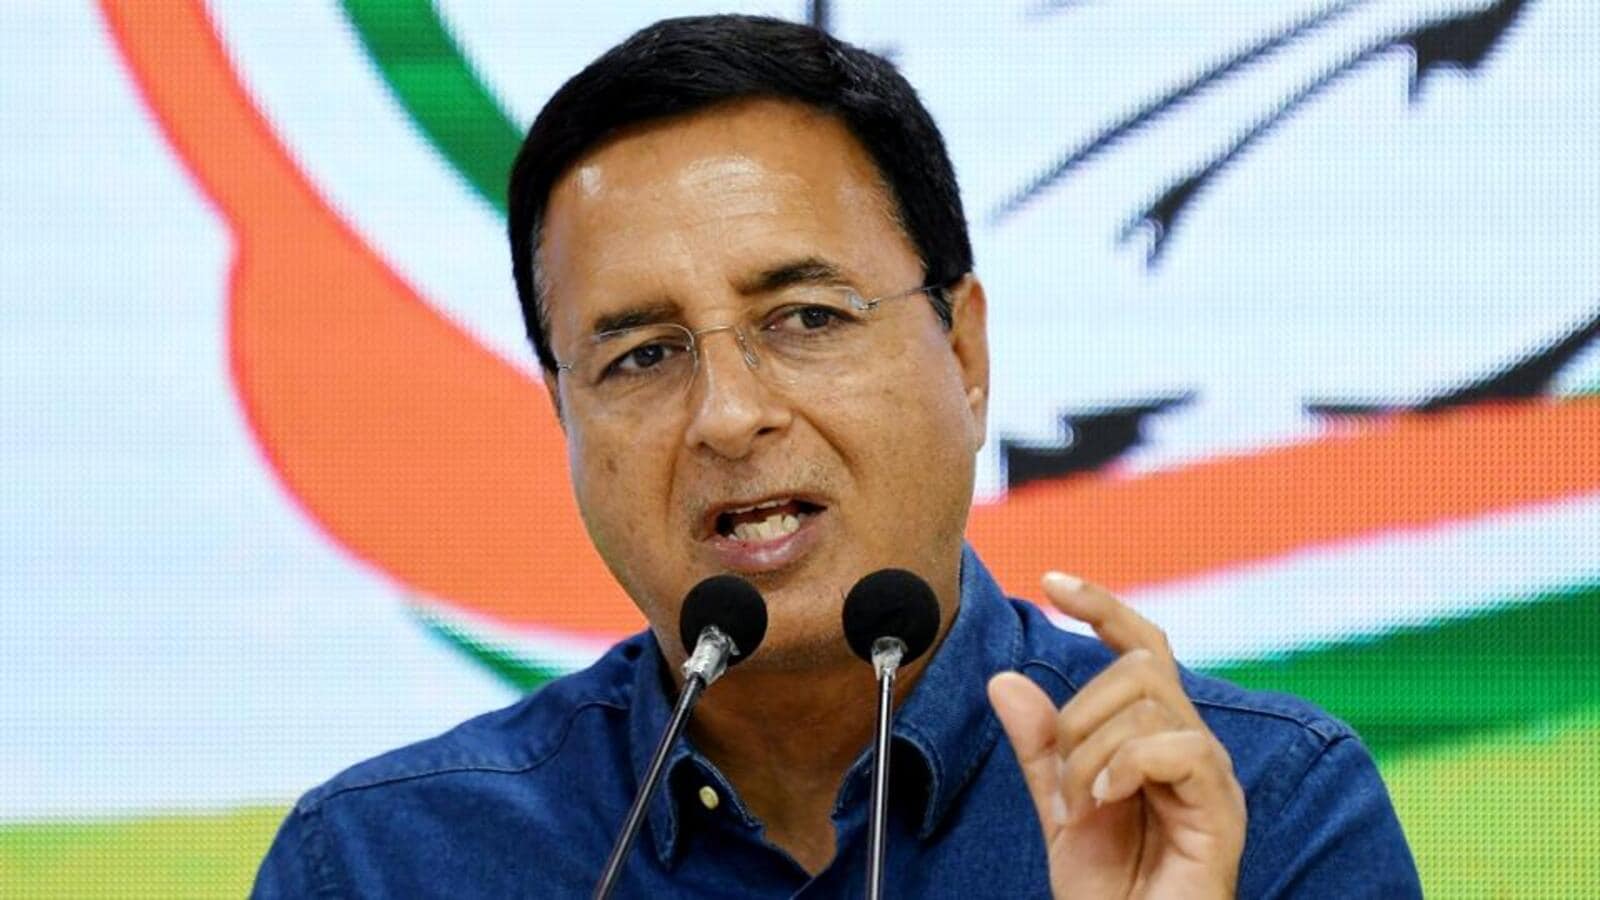 Poll wins gave govt licence to loot: Cong hits out at price hikes